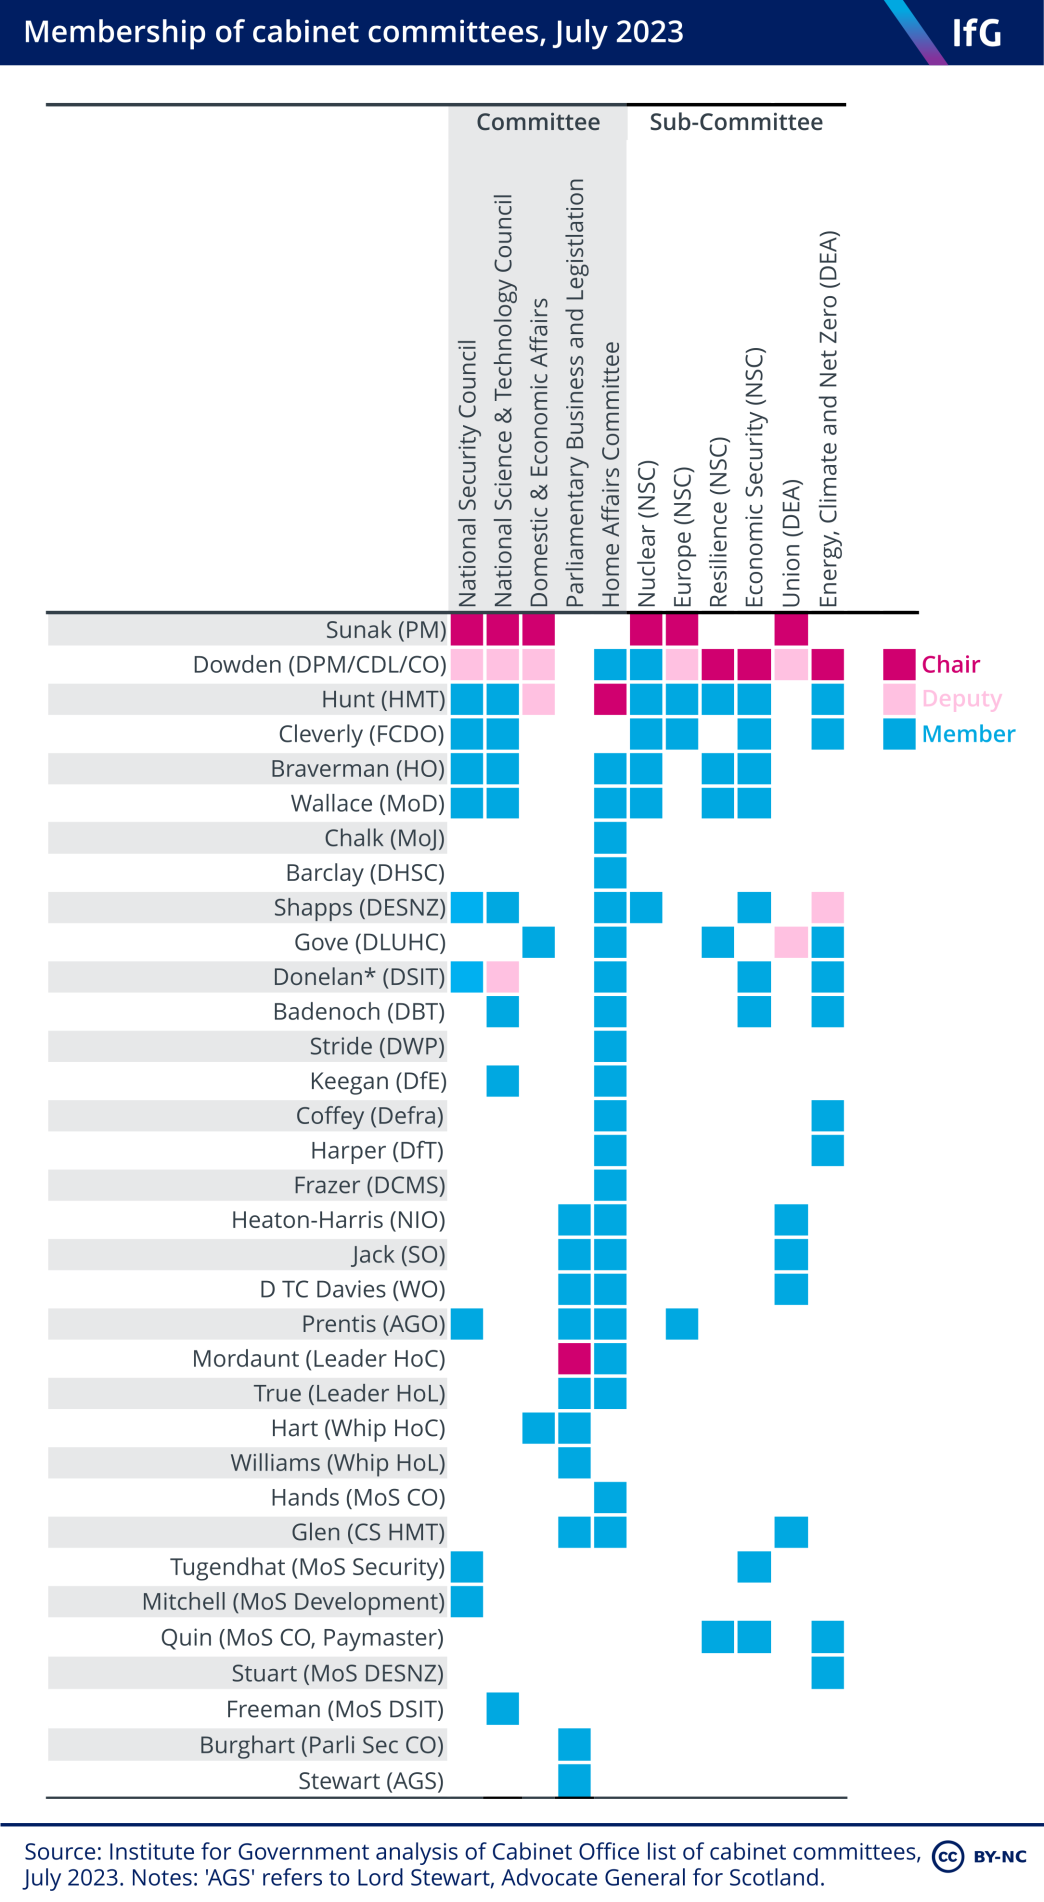 A mosaic chart of the membership of cabinet committees in July 2023. It shows that of the 11 cabinet committees, Oliver Dowden, deputy PM and chancellor of the duchy of Lancaster, sites on 10 - the most of any cabinet member. The PM Rishi Sunak chairs all six committees on which he sits.